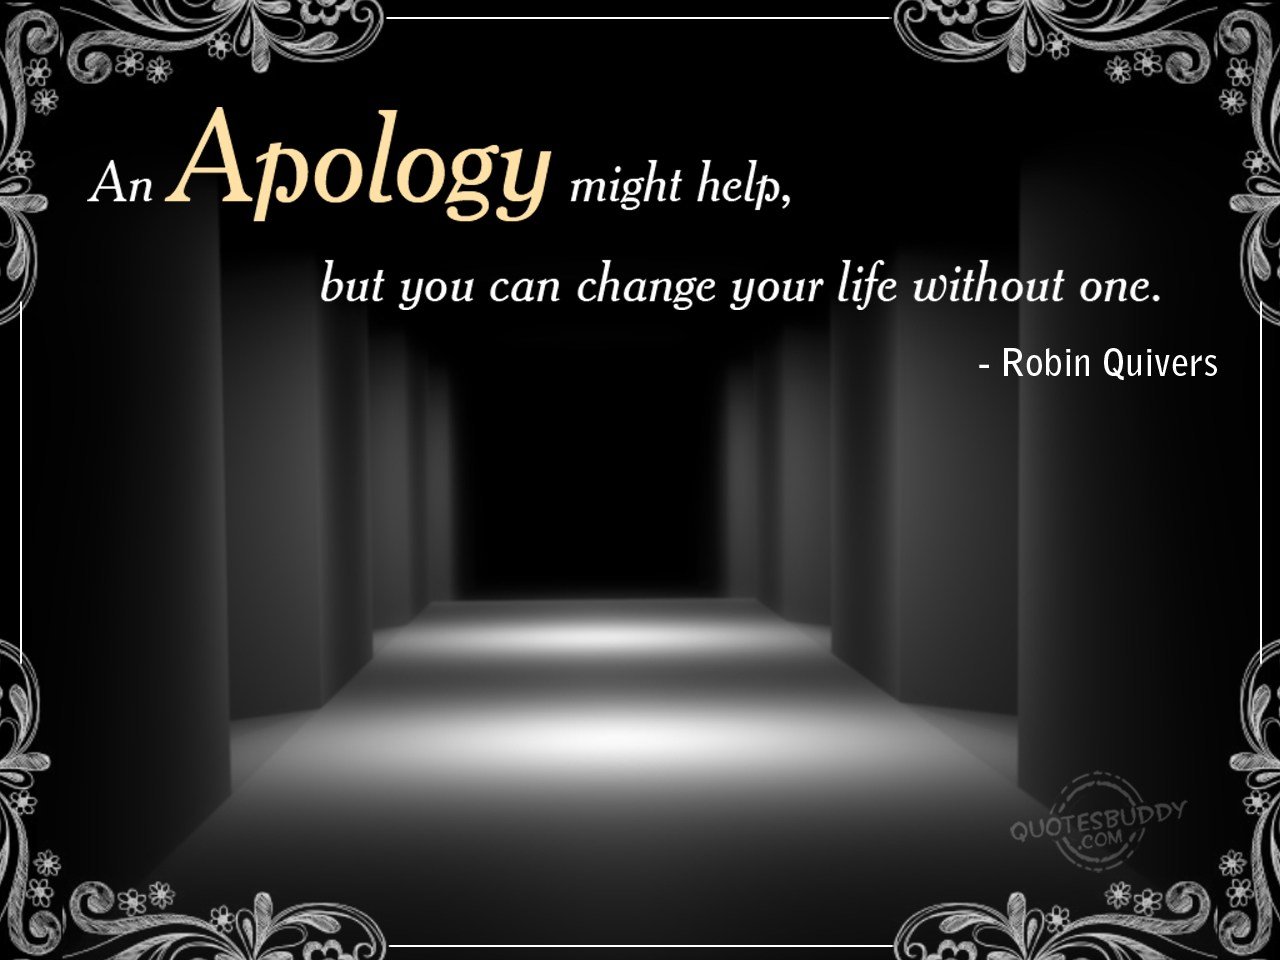 An apology might help, but you can change your life without one.